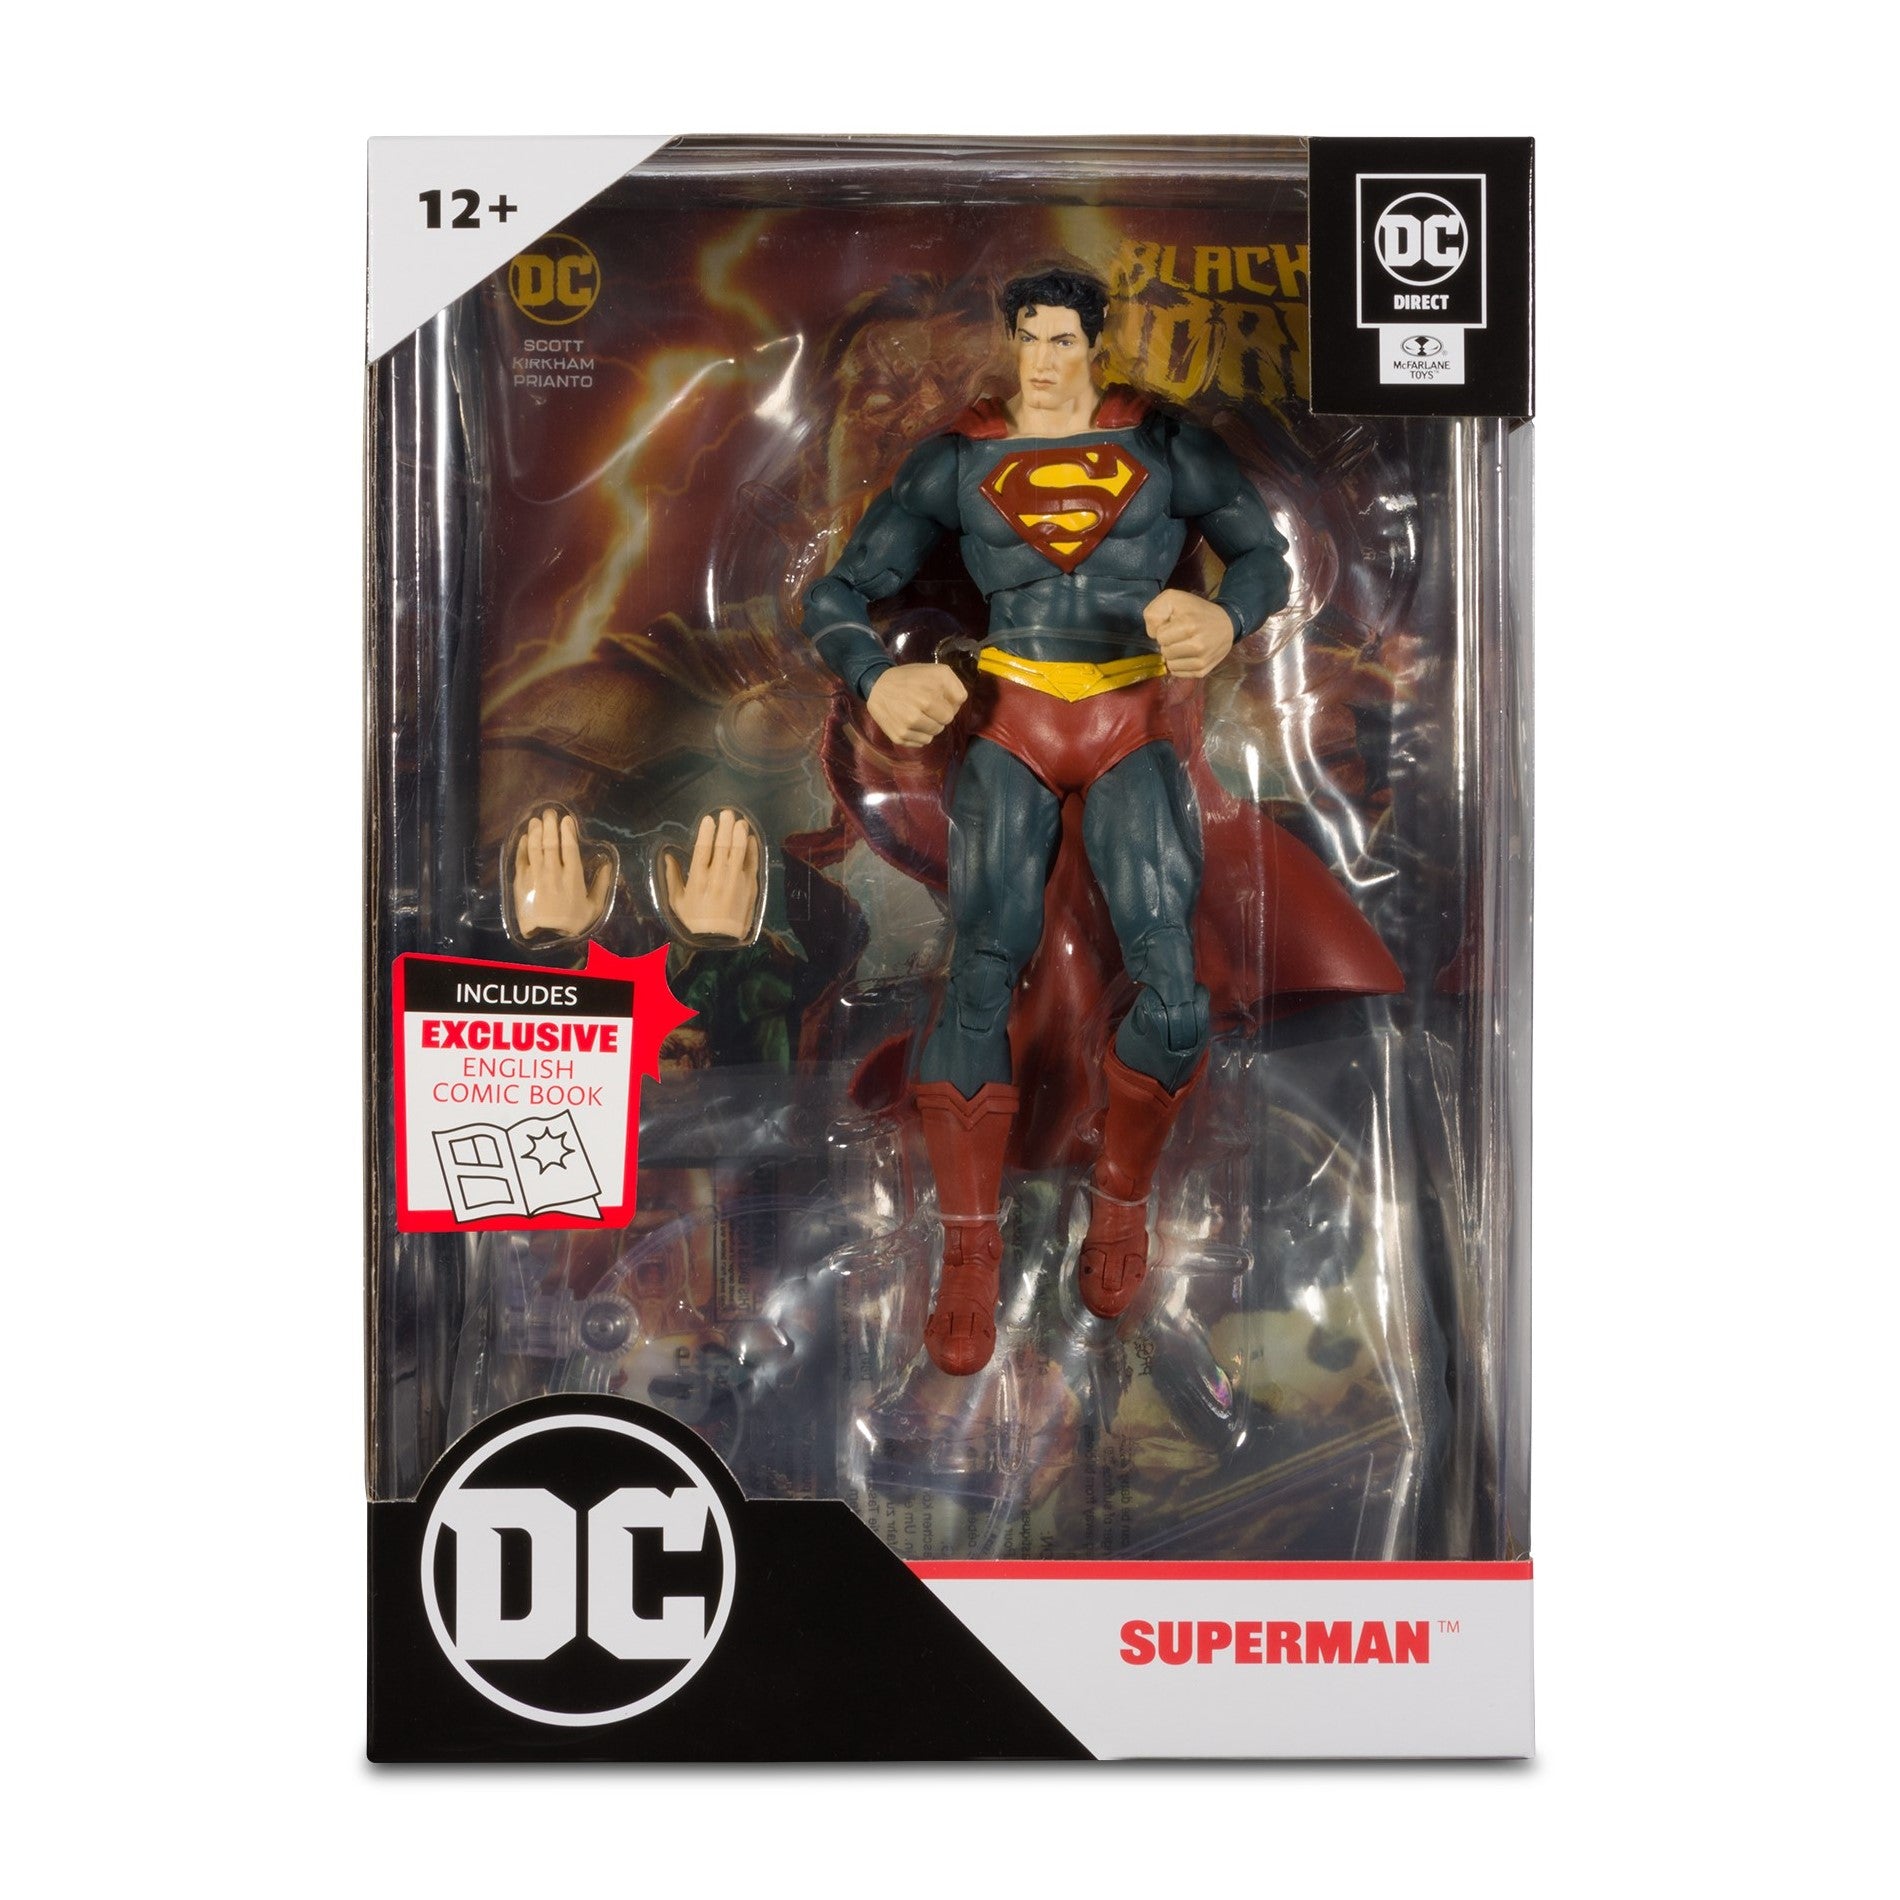 DC Direct Page Punchers Superman 7" with Black Adam Comic - McFarlane Toys